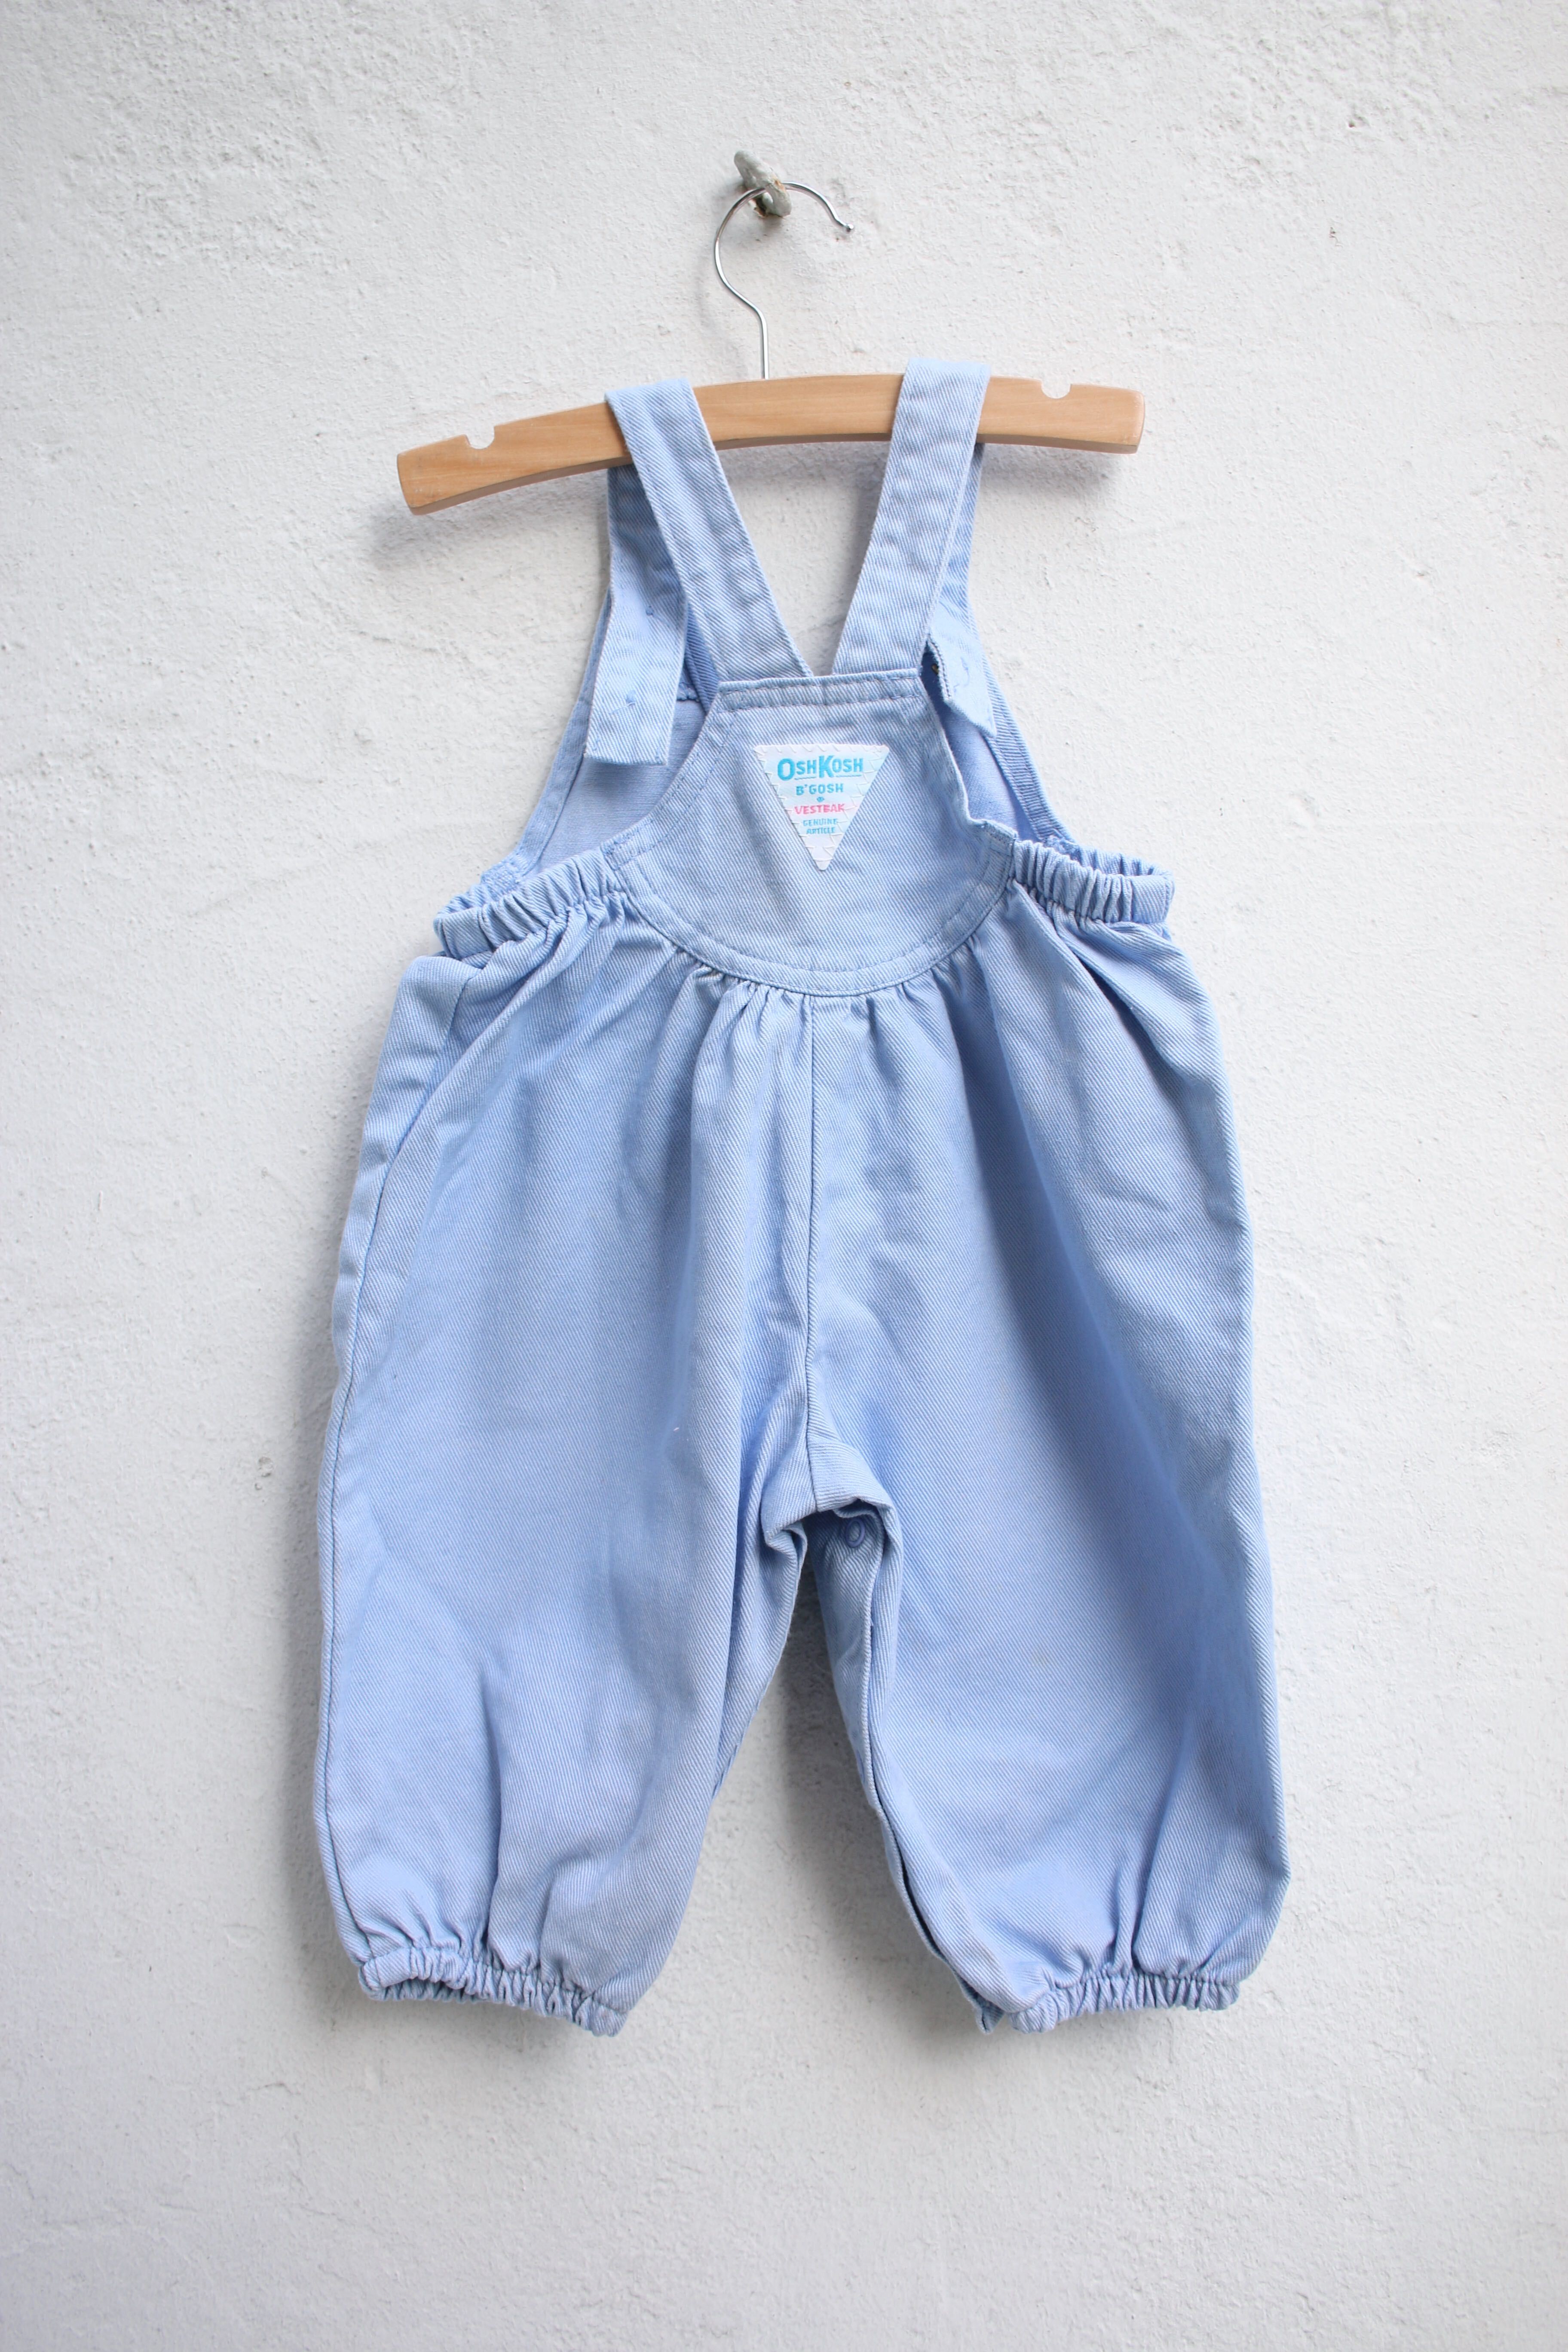 Vintage OshKosh lilac crossover overalls - size 12 months - made in USA